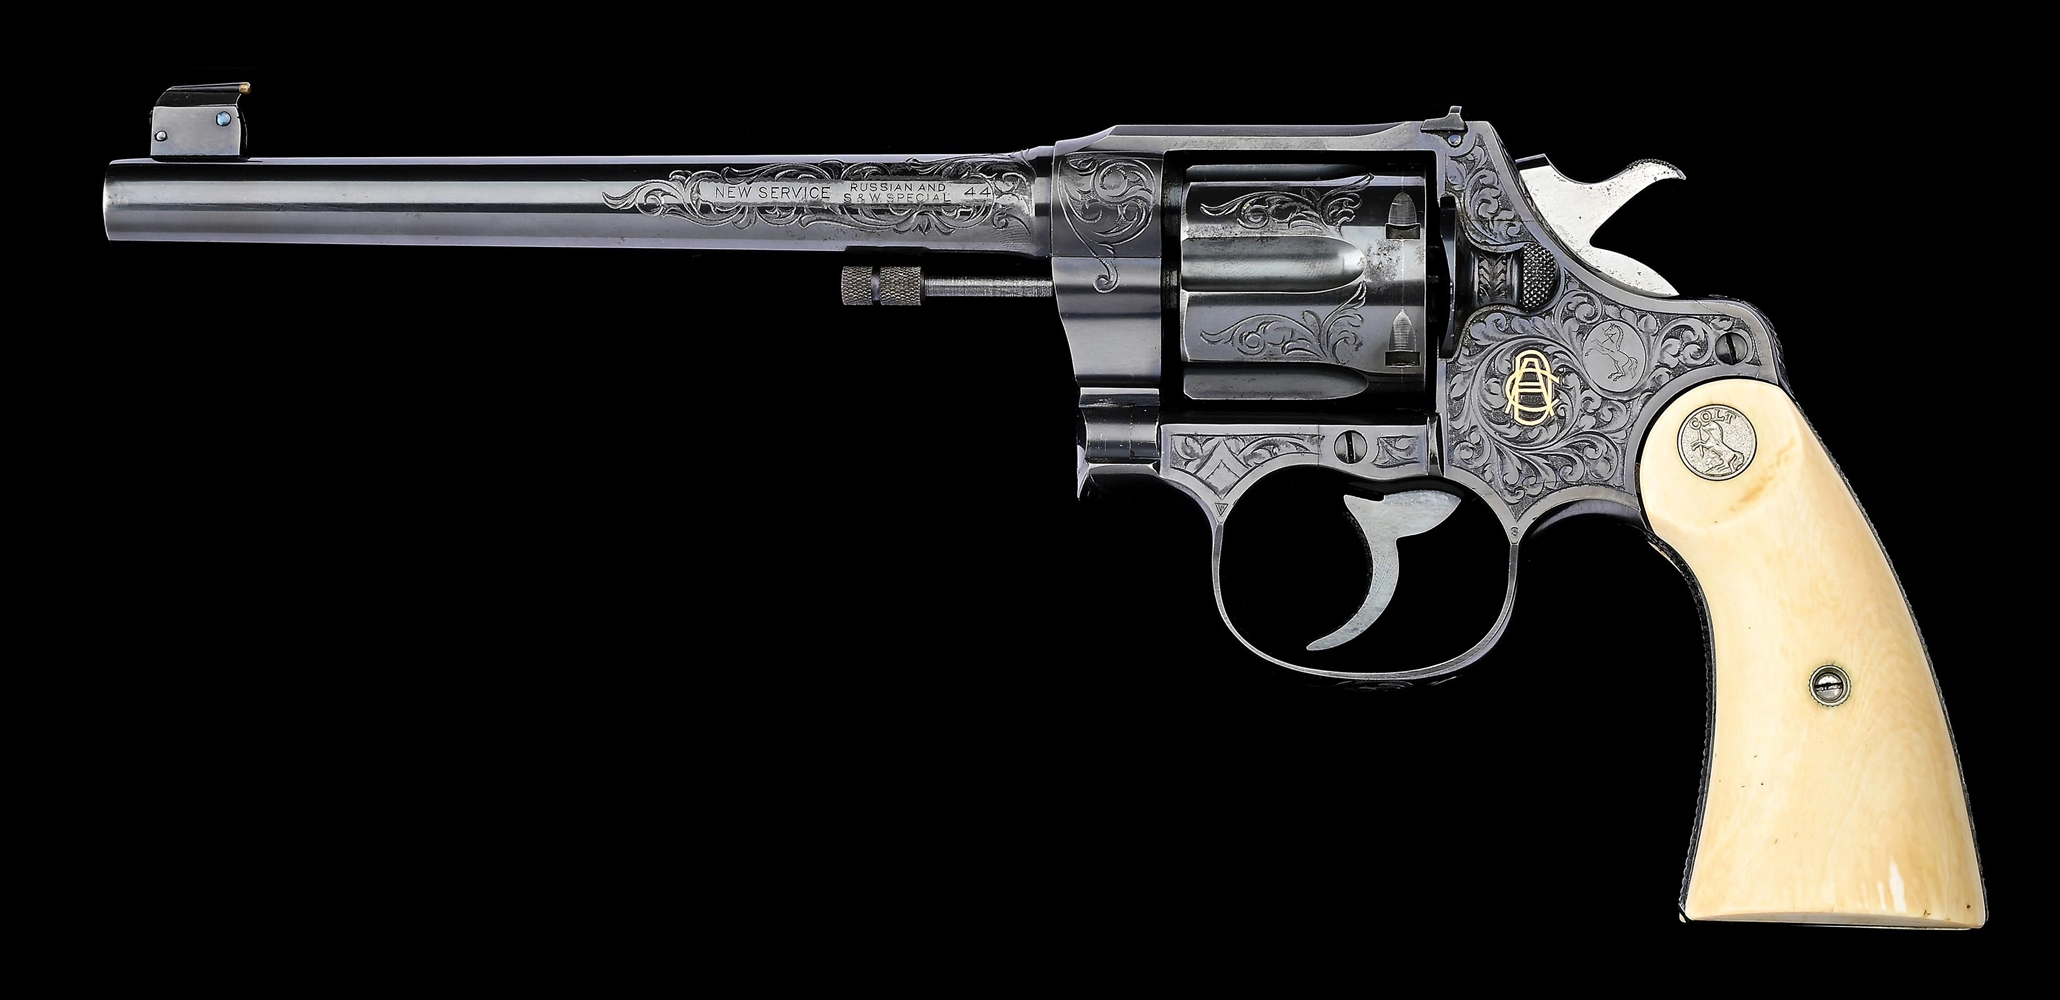 (C) BEAUTIFUL, EXTREMELY SCARCE, FACTORY ENGRAVED AND GOLD INLAID, COLT NEW SERVICE TARGET DOUBLE ACTION REVOLVER WITH A FACTORY LETTER (1927).